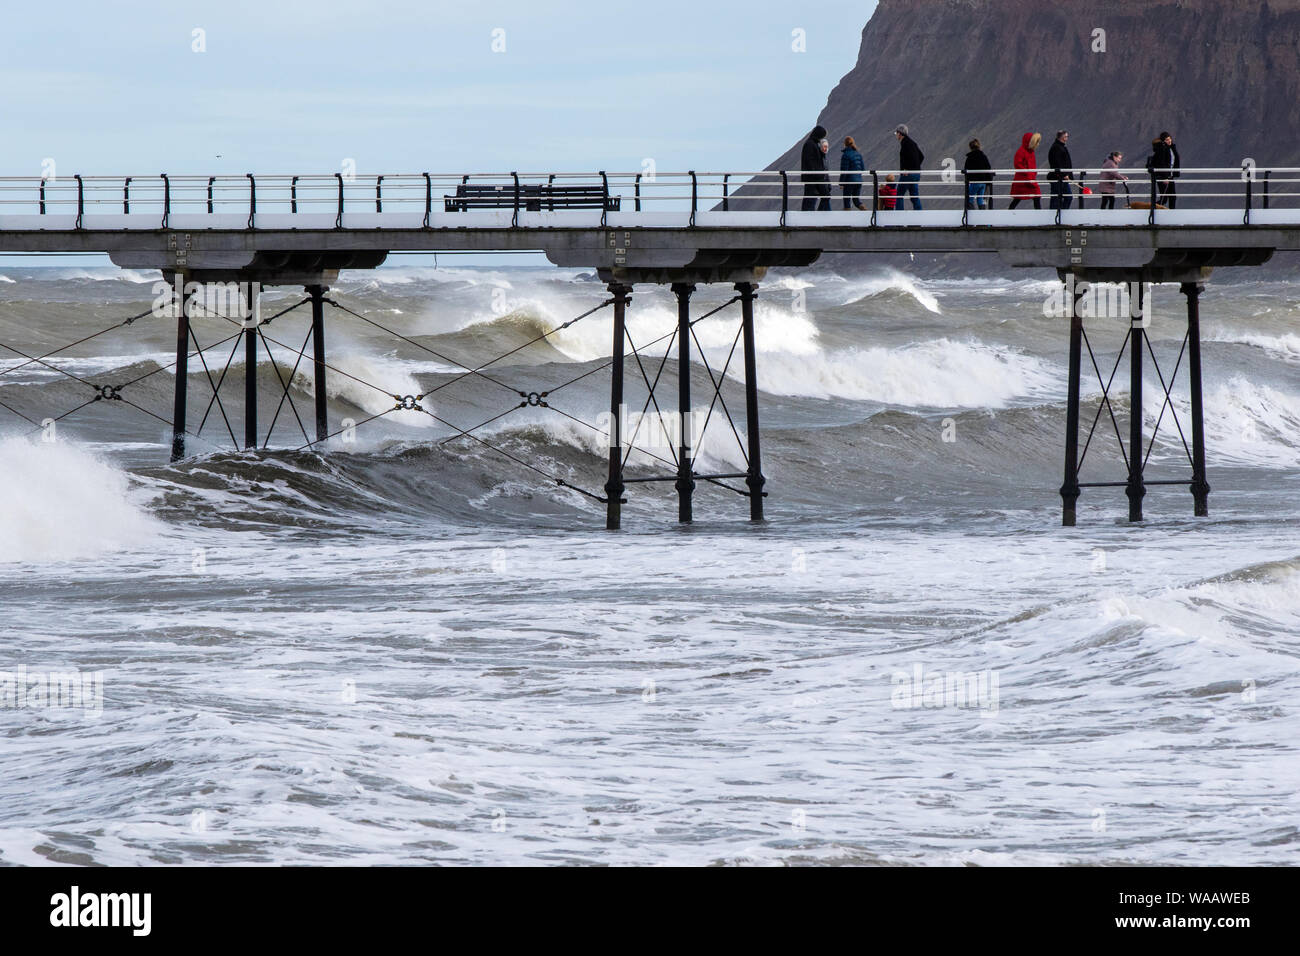 People walking on Saltburn pier during cold, stormy weather, with a strong surf below. Stock Photo